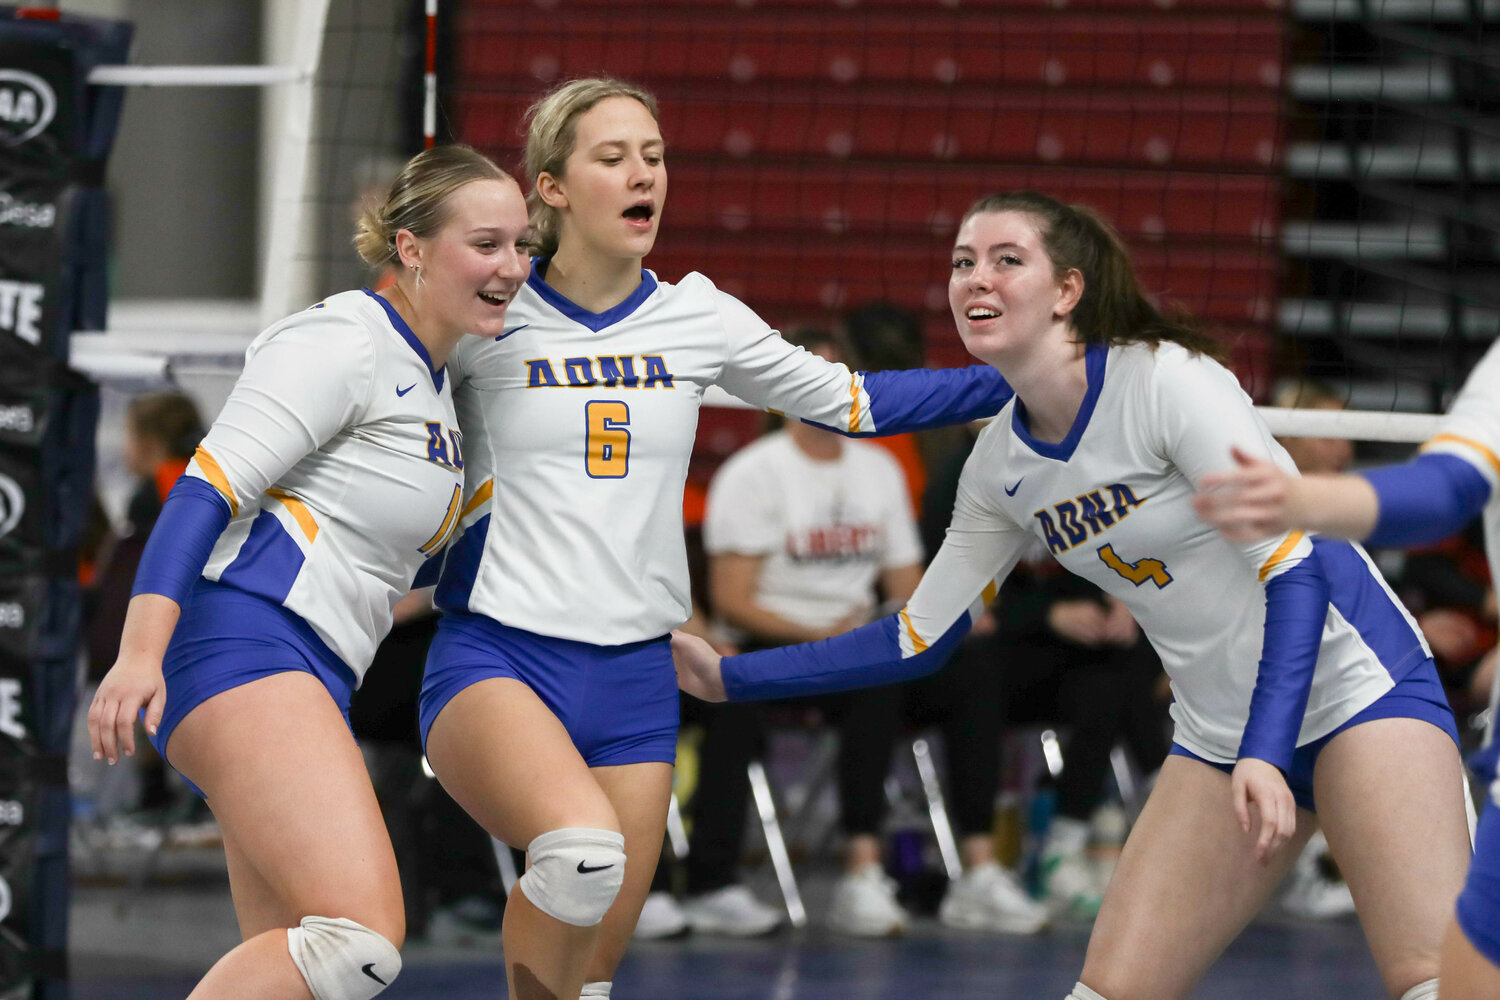 The Pirates celebrate after a point during a match at the state tournament on Nov. 9 in Yakima.